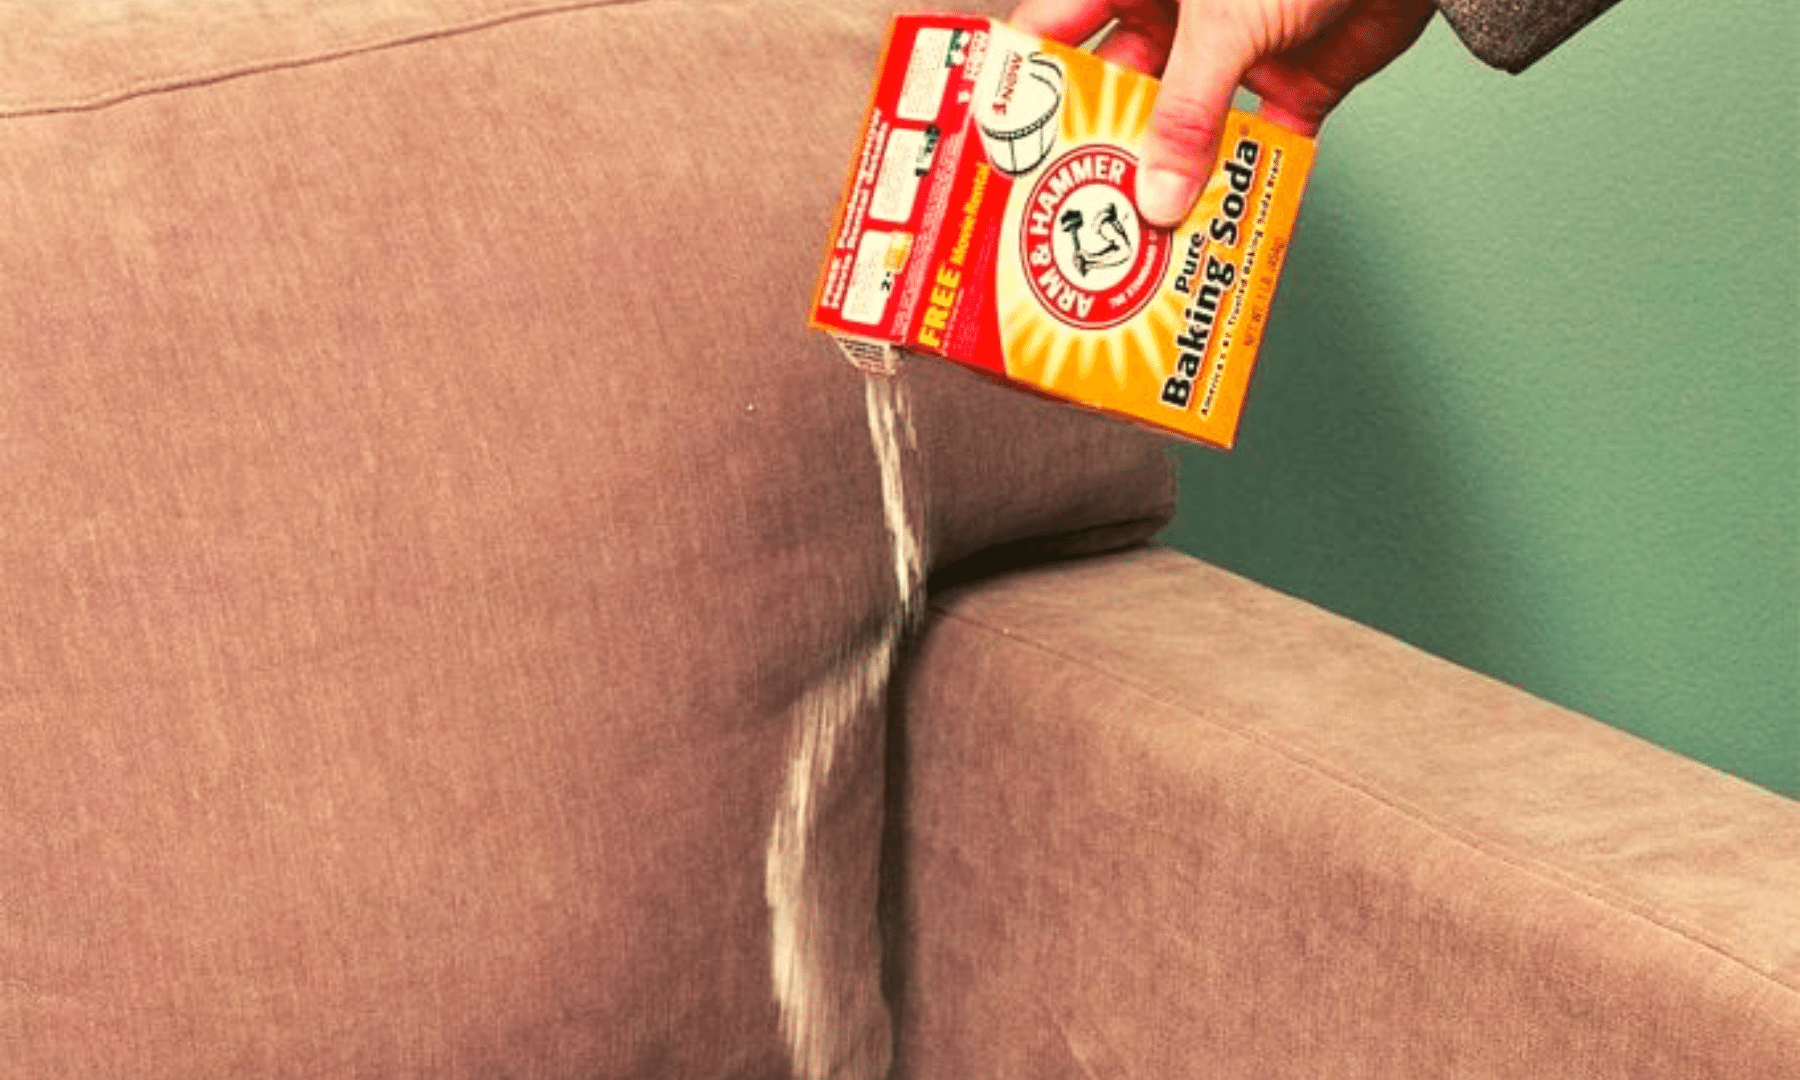 Sprinkling baking soda on a couch